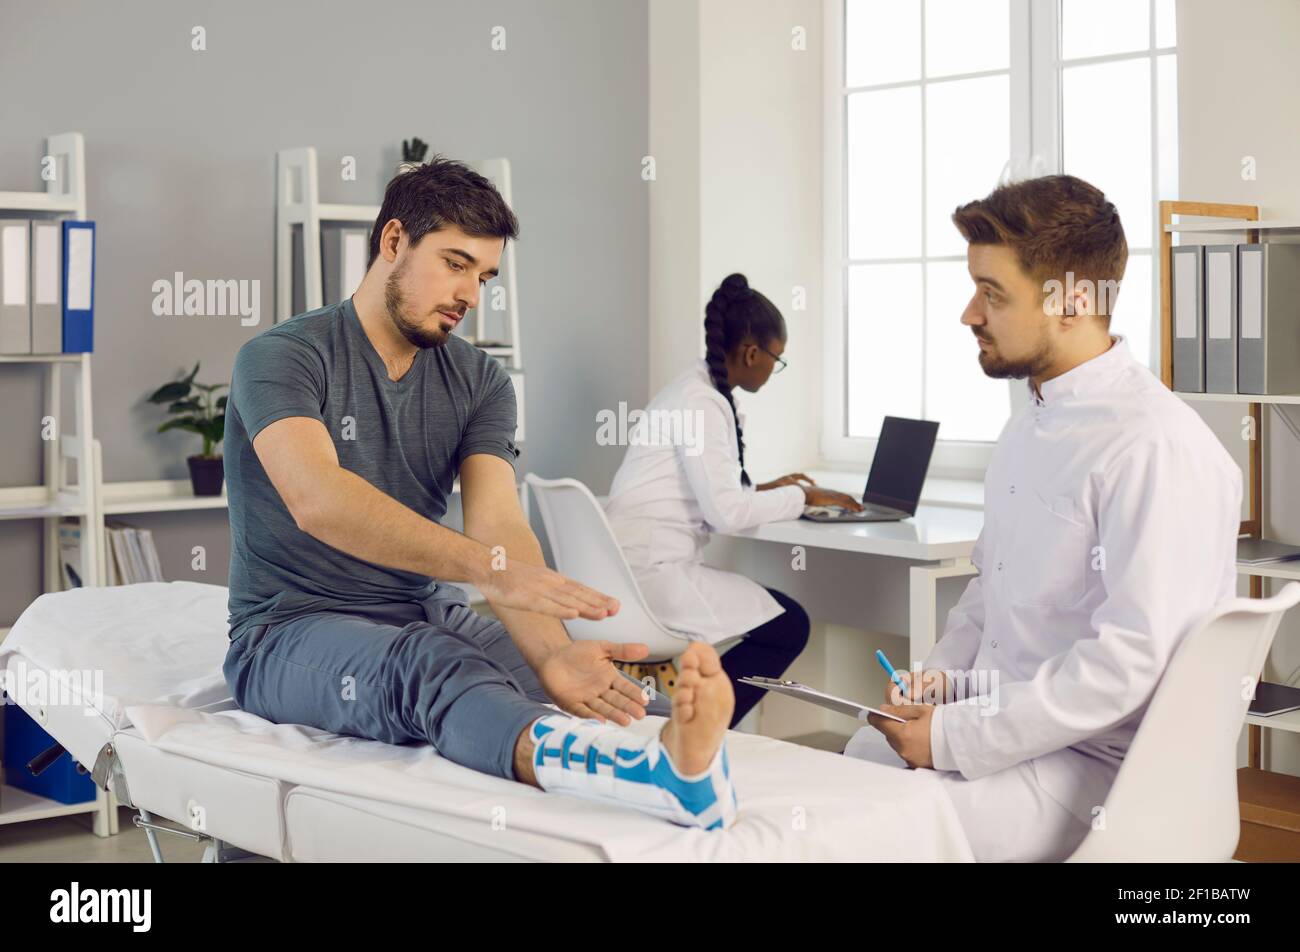 Man doctor listening complaints of male patient with injured broken leg Stock Photo